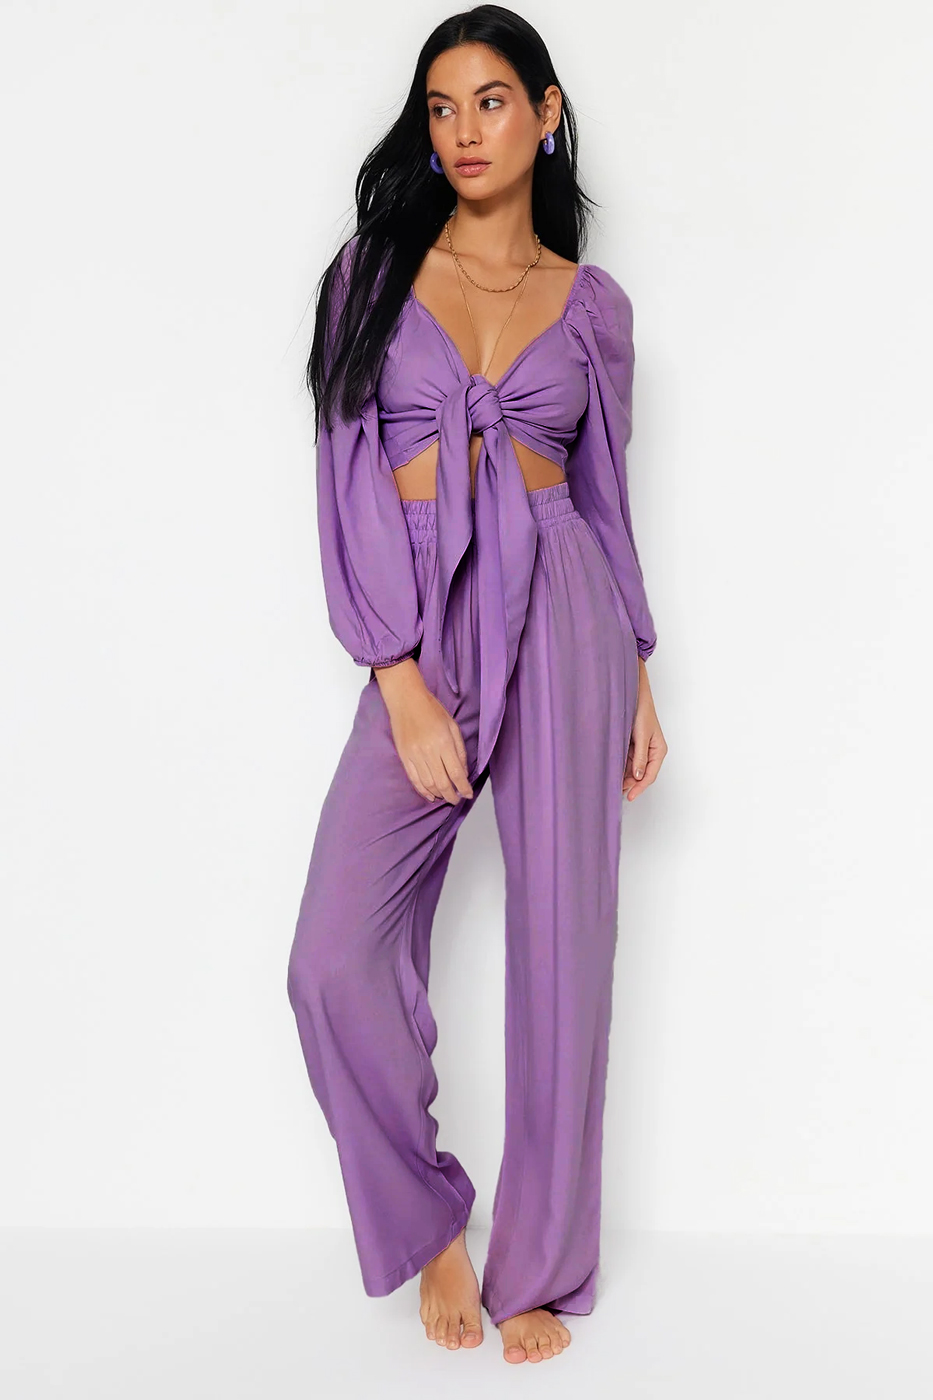 Trendyol Lilac Woven Tie Blouse and Pants Suit